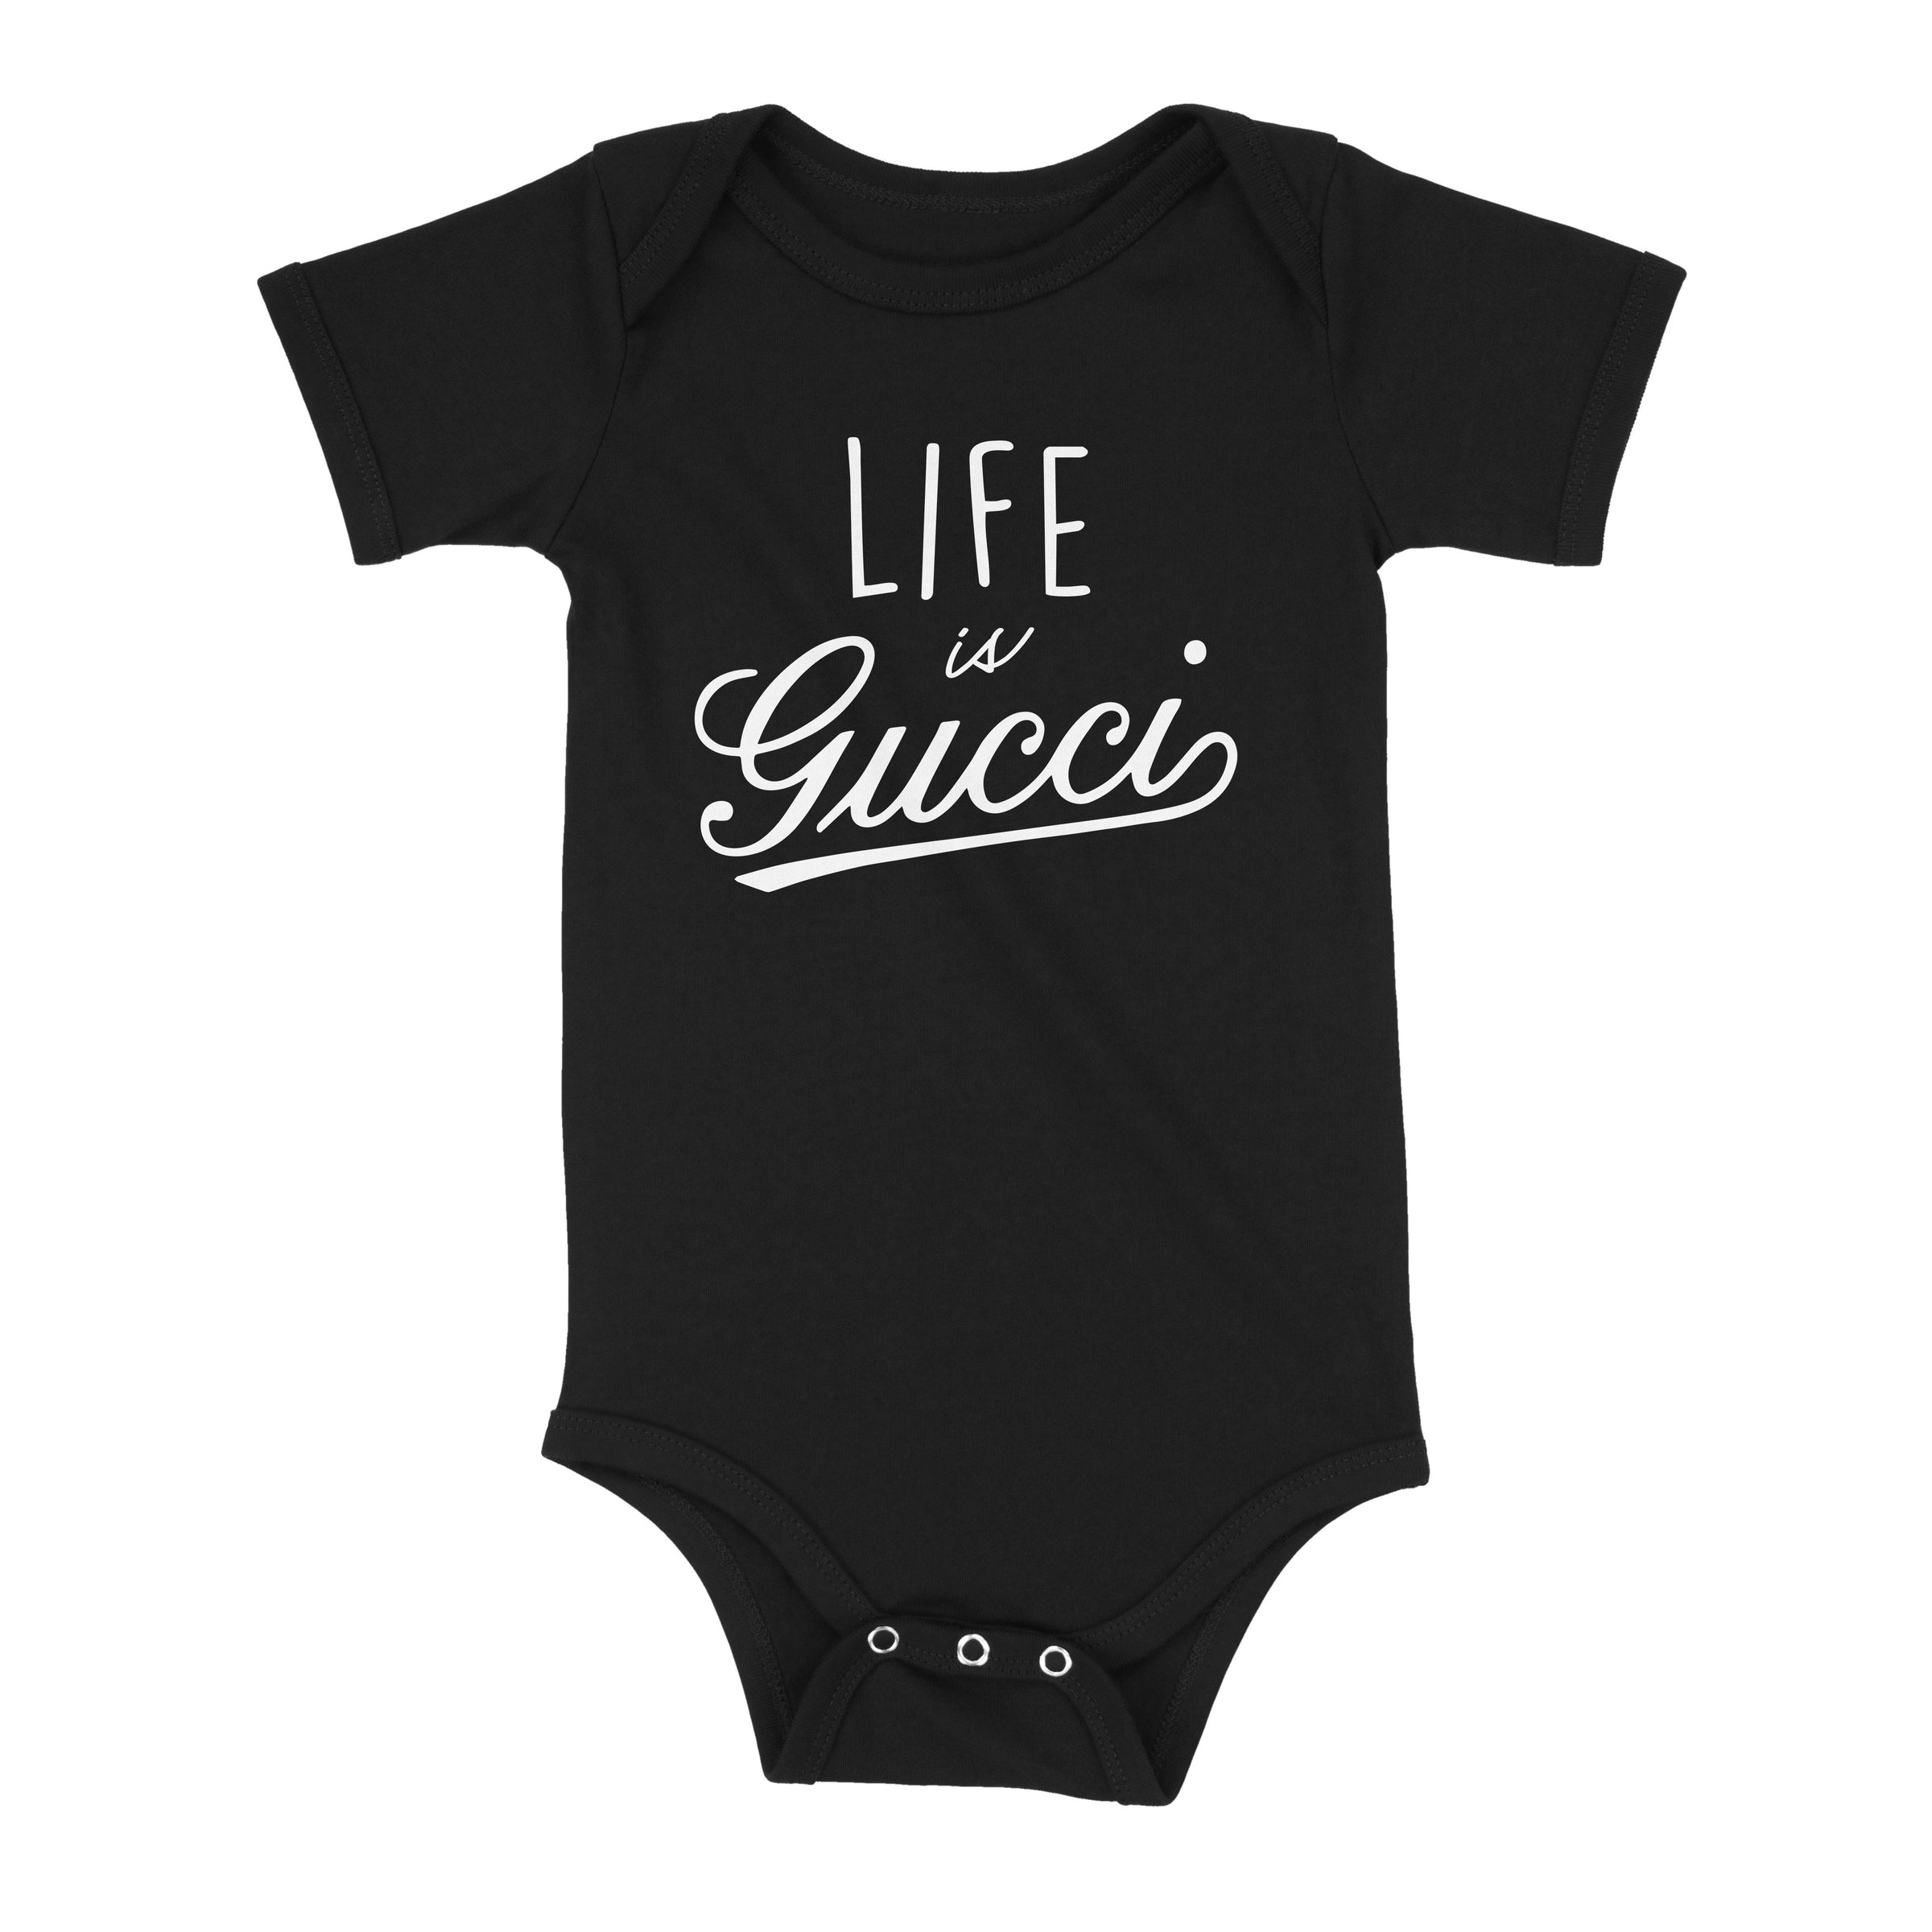 Life is Gucci Baby Onesie - Baby Truth